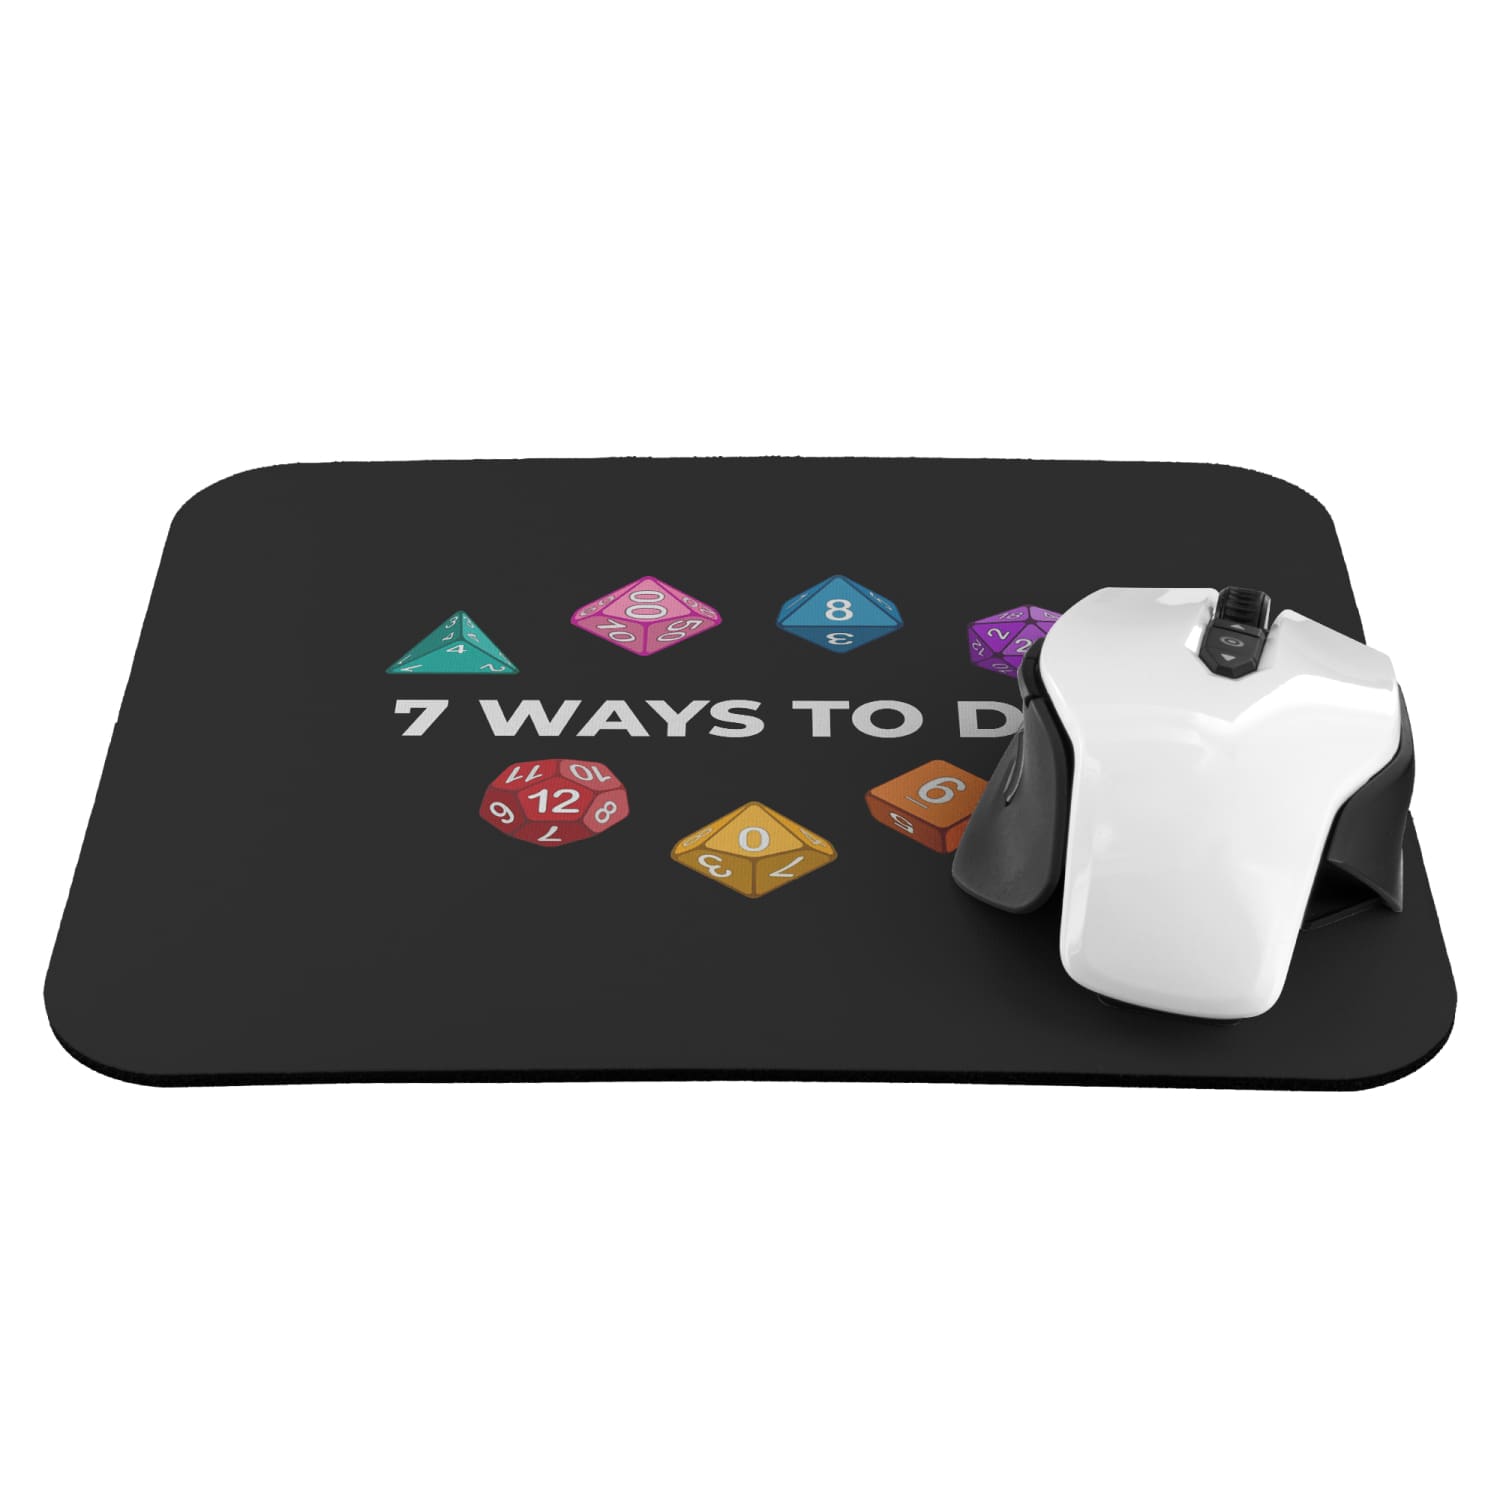 7 Ways To Die Mousepad - Mousepads